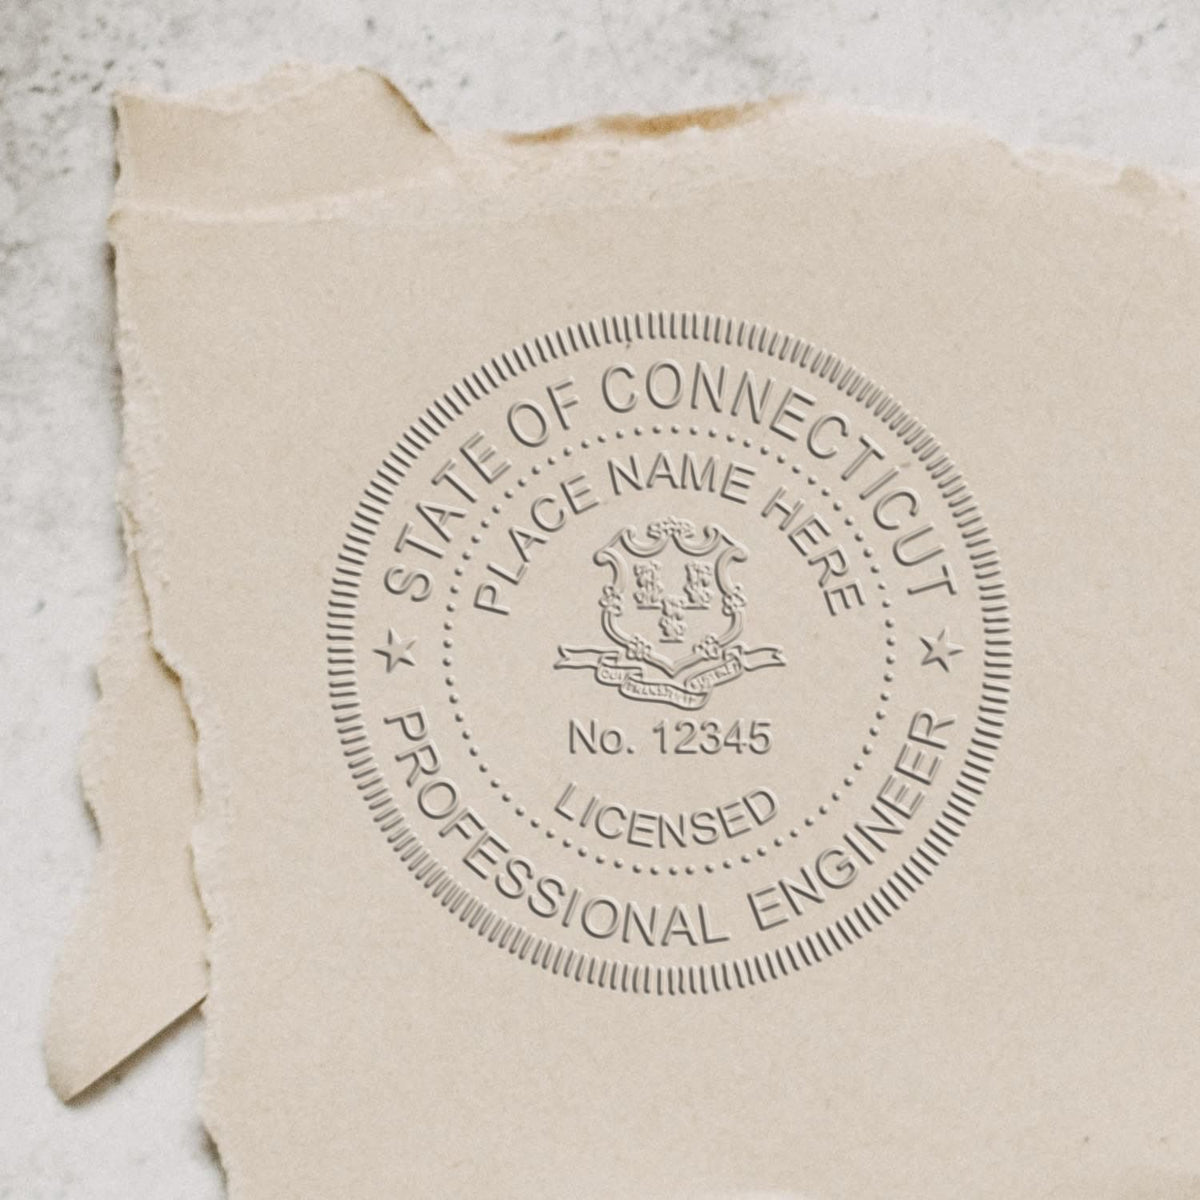 An in use photo of the Hybrid Connecticut Engineer Seal showing a sample imprint on a cardstock